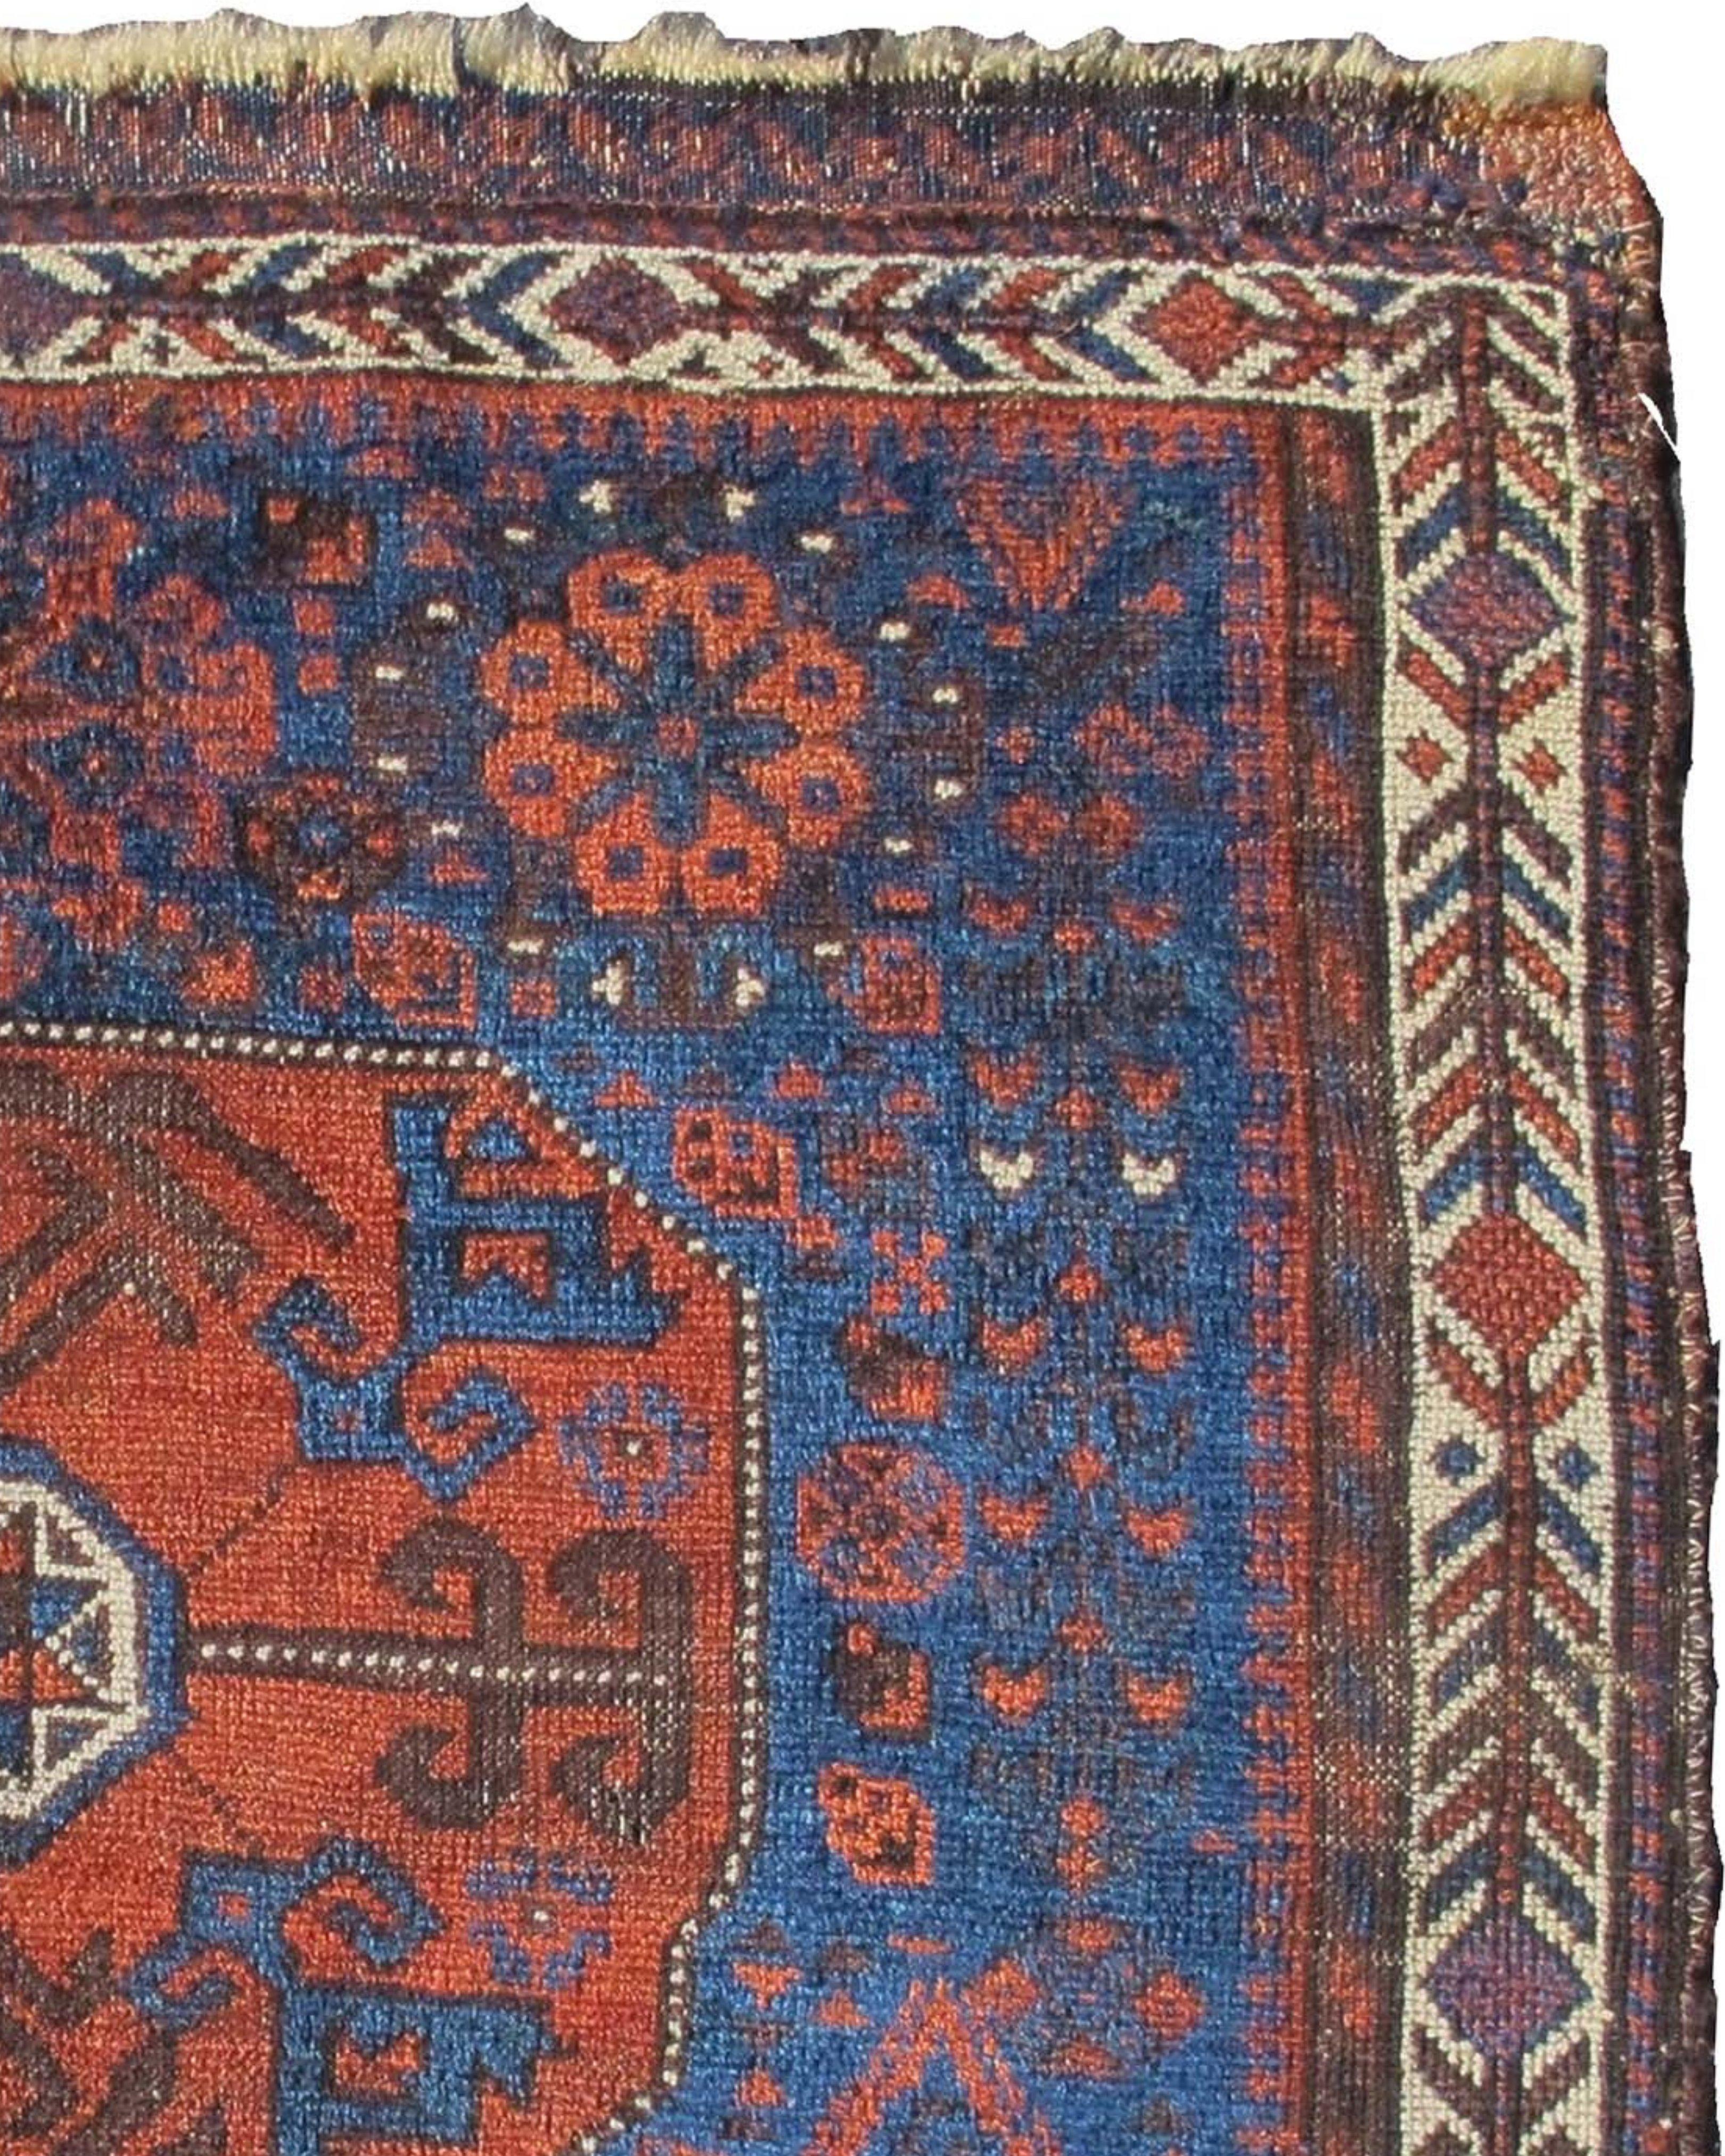 Baluch Bag Face Rug, Late 19th Century

Additional Information:
Dimensions: 2'8